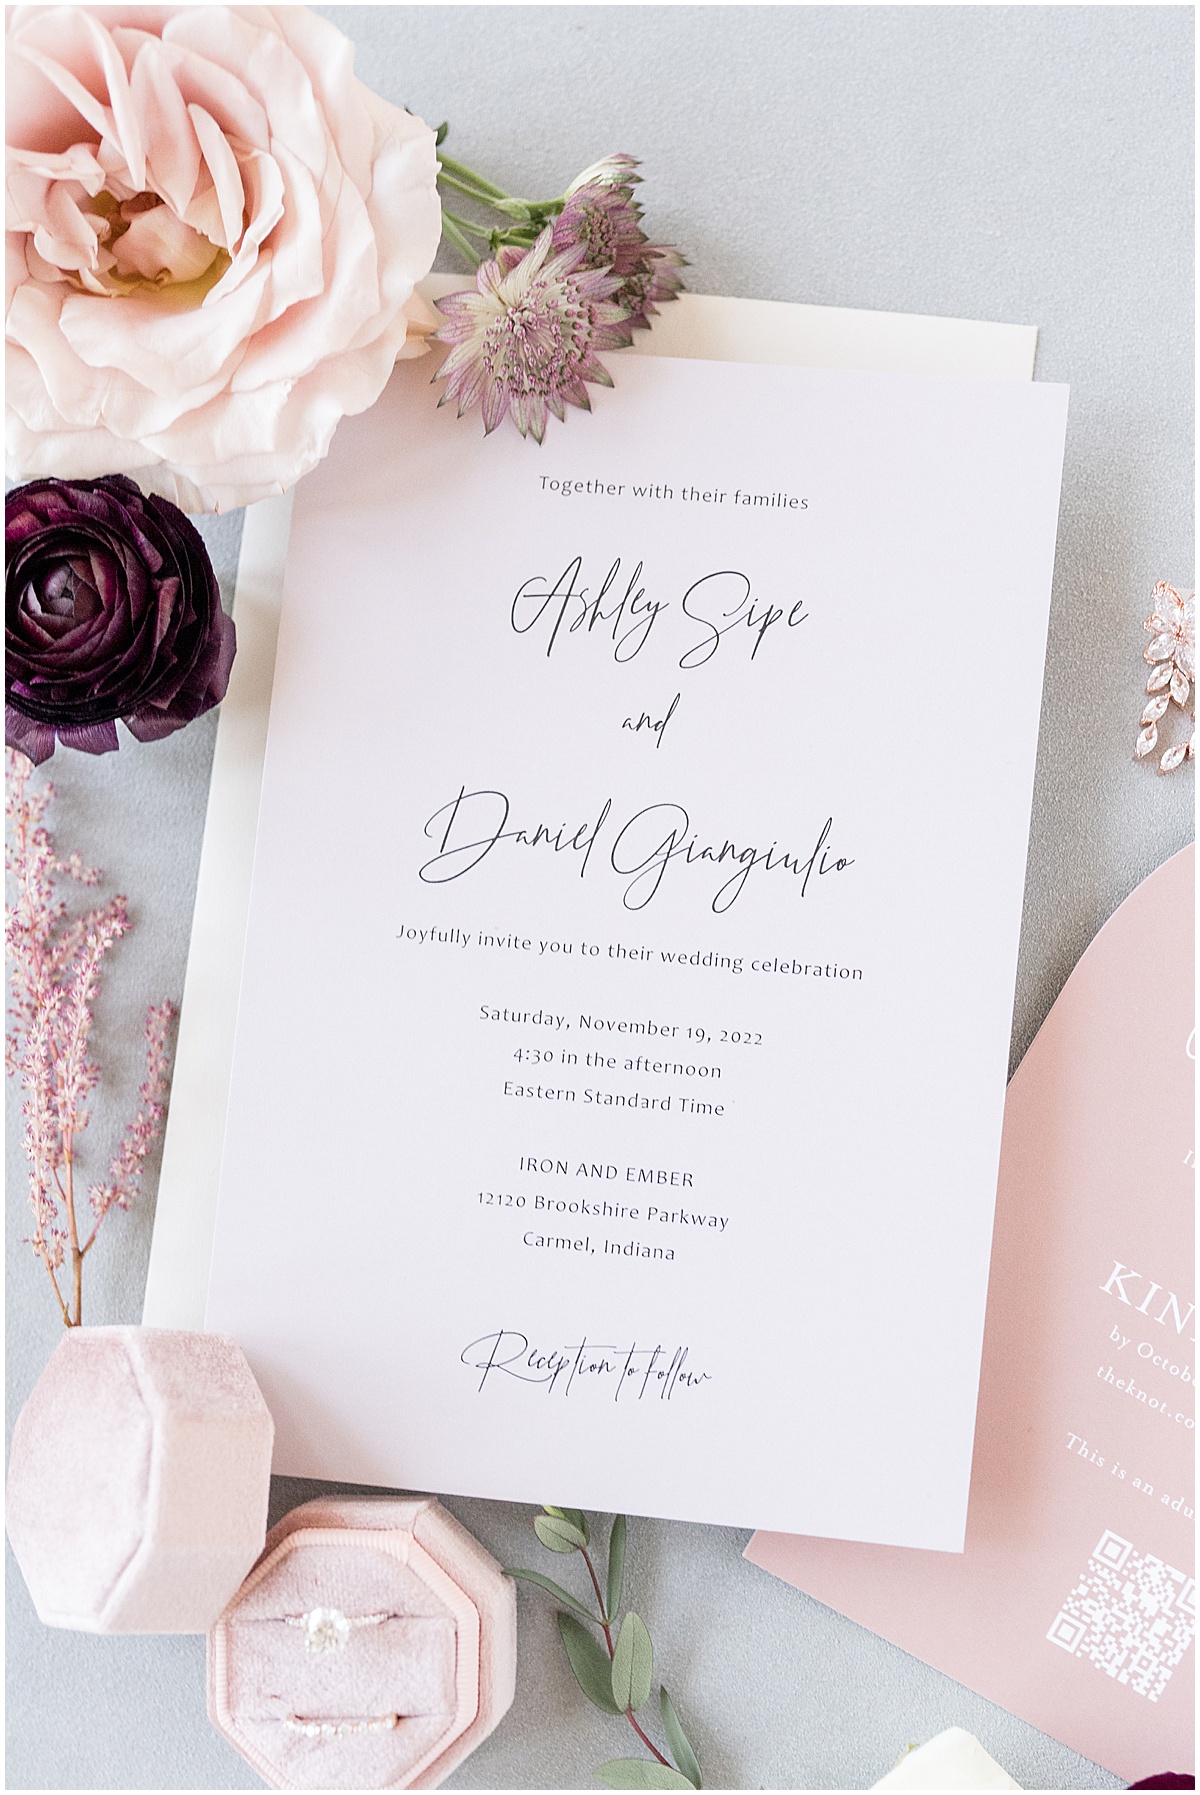 Invitation flat lay for Iron & Ember events wedding in Carmel, Indiana